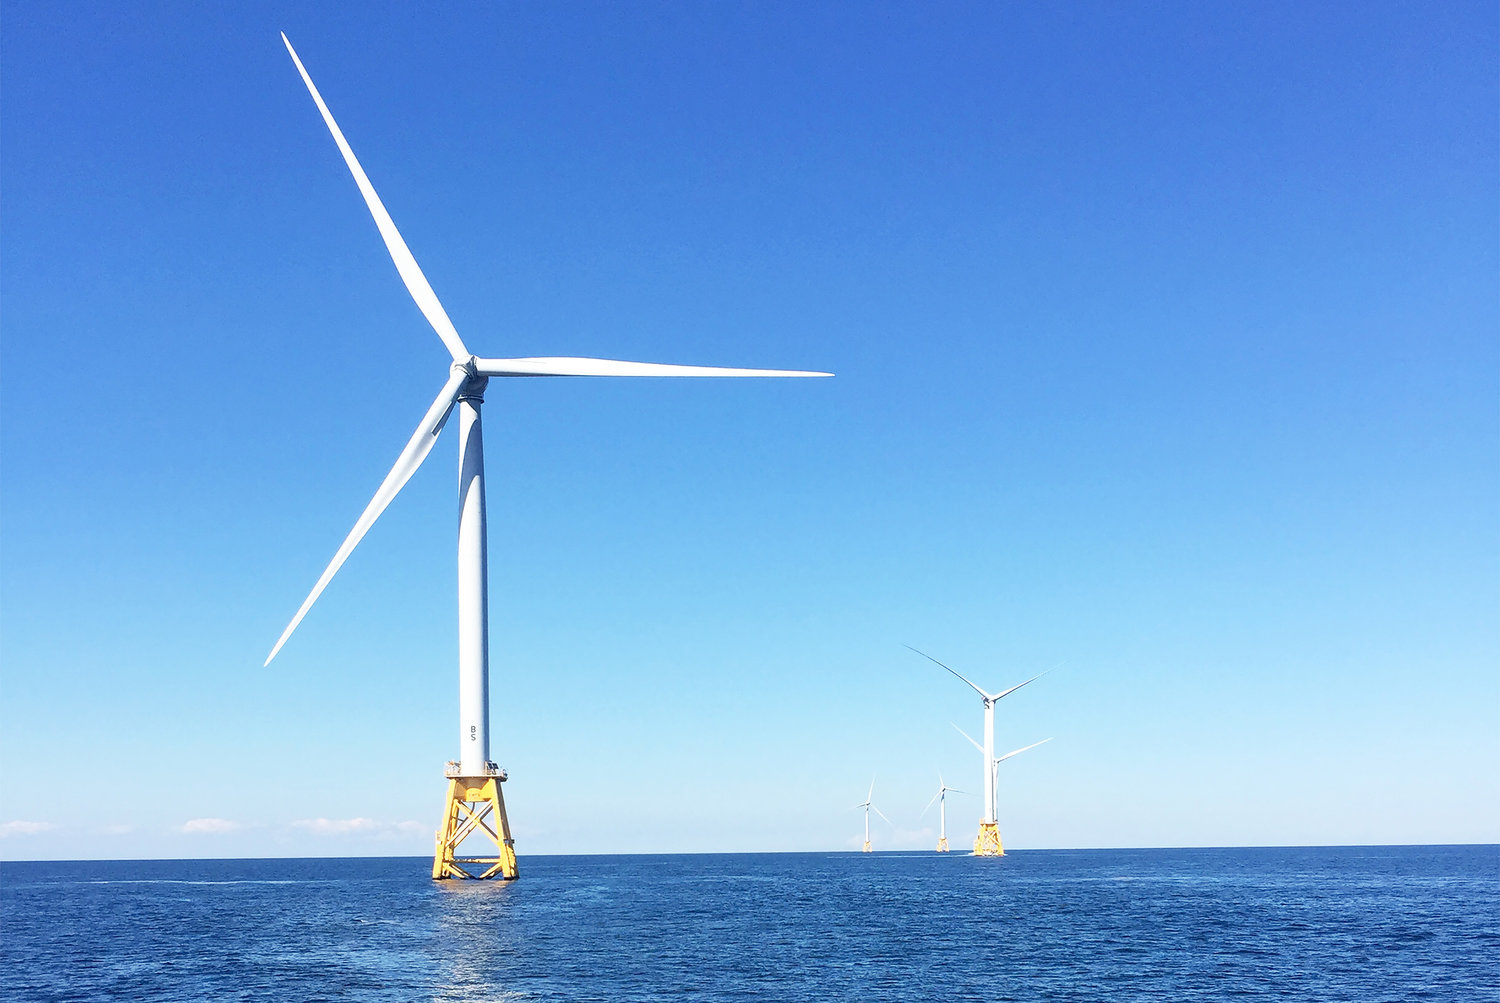 Block Island Ferry offers narrated tours of the BI Wind Farm